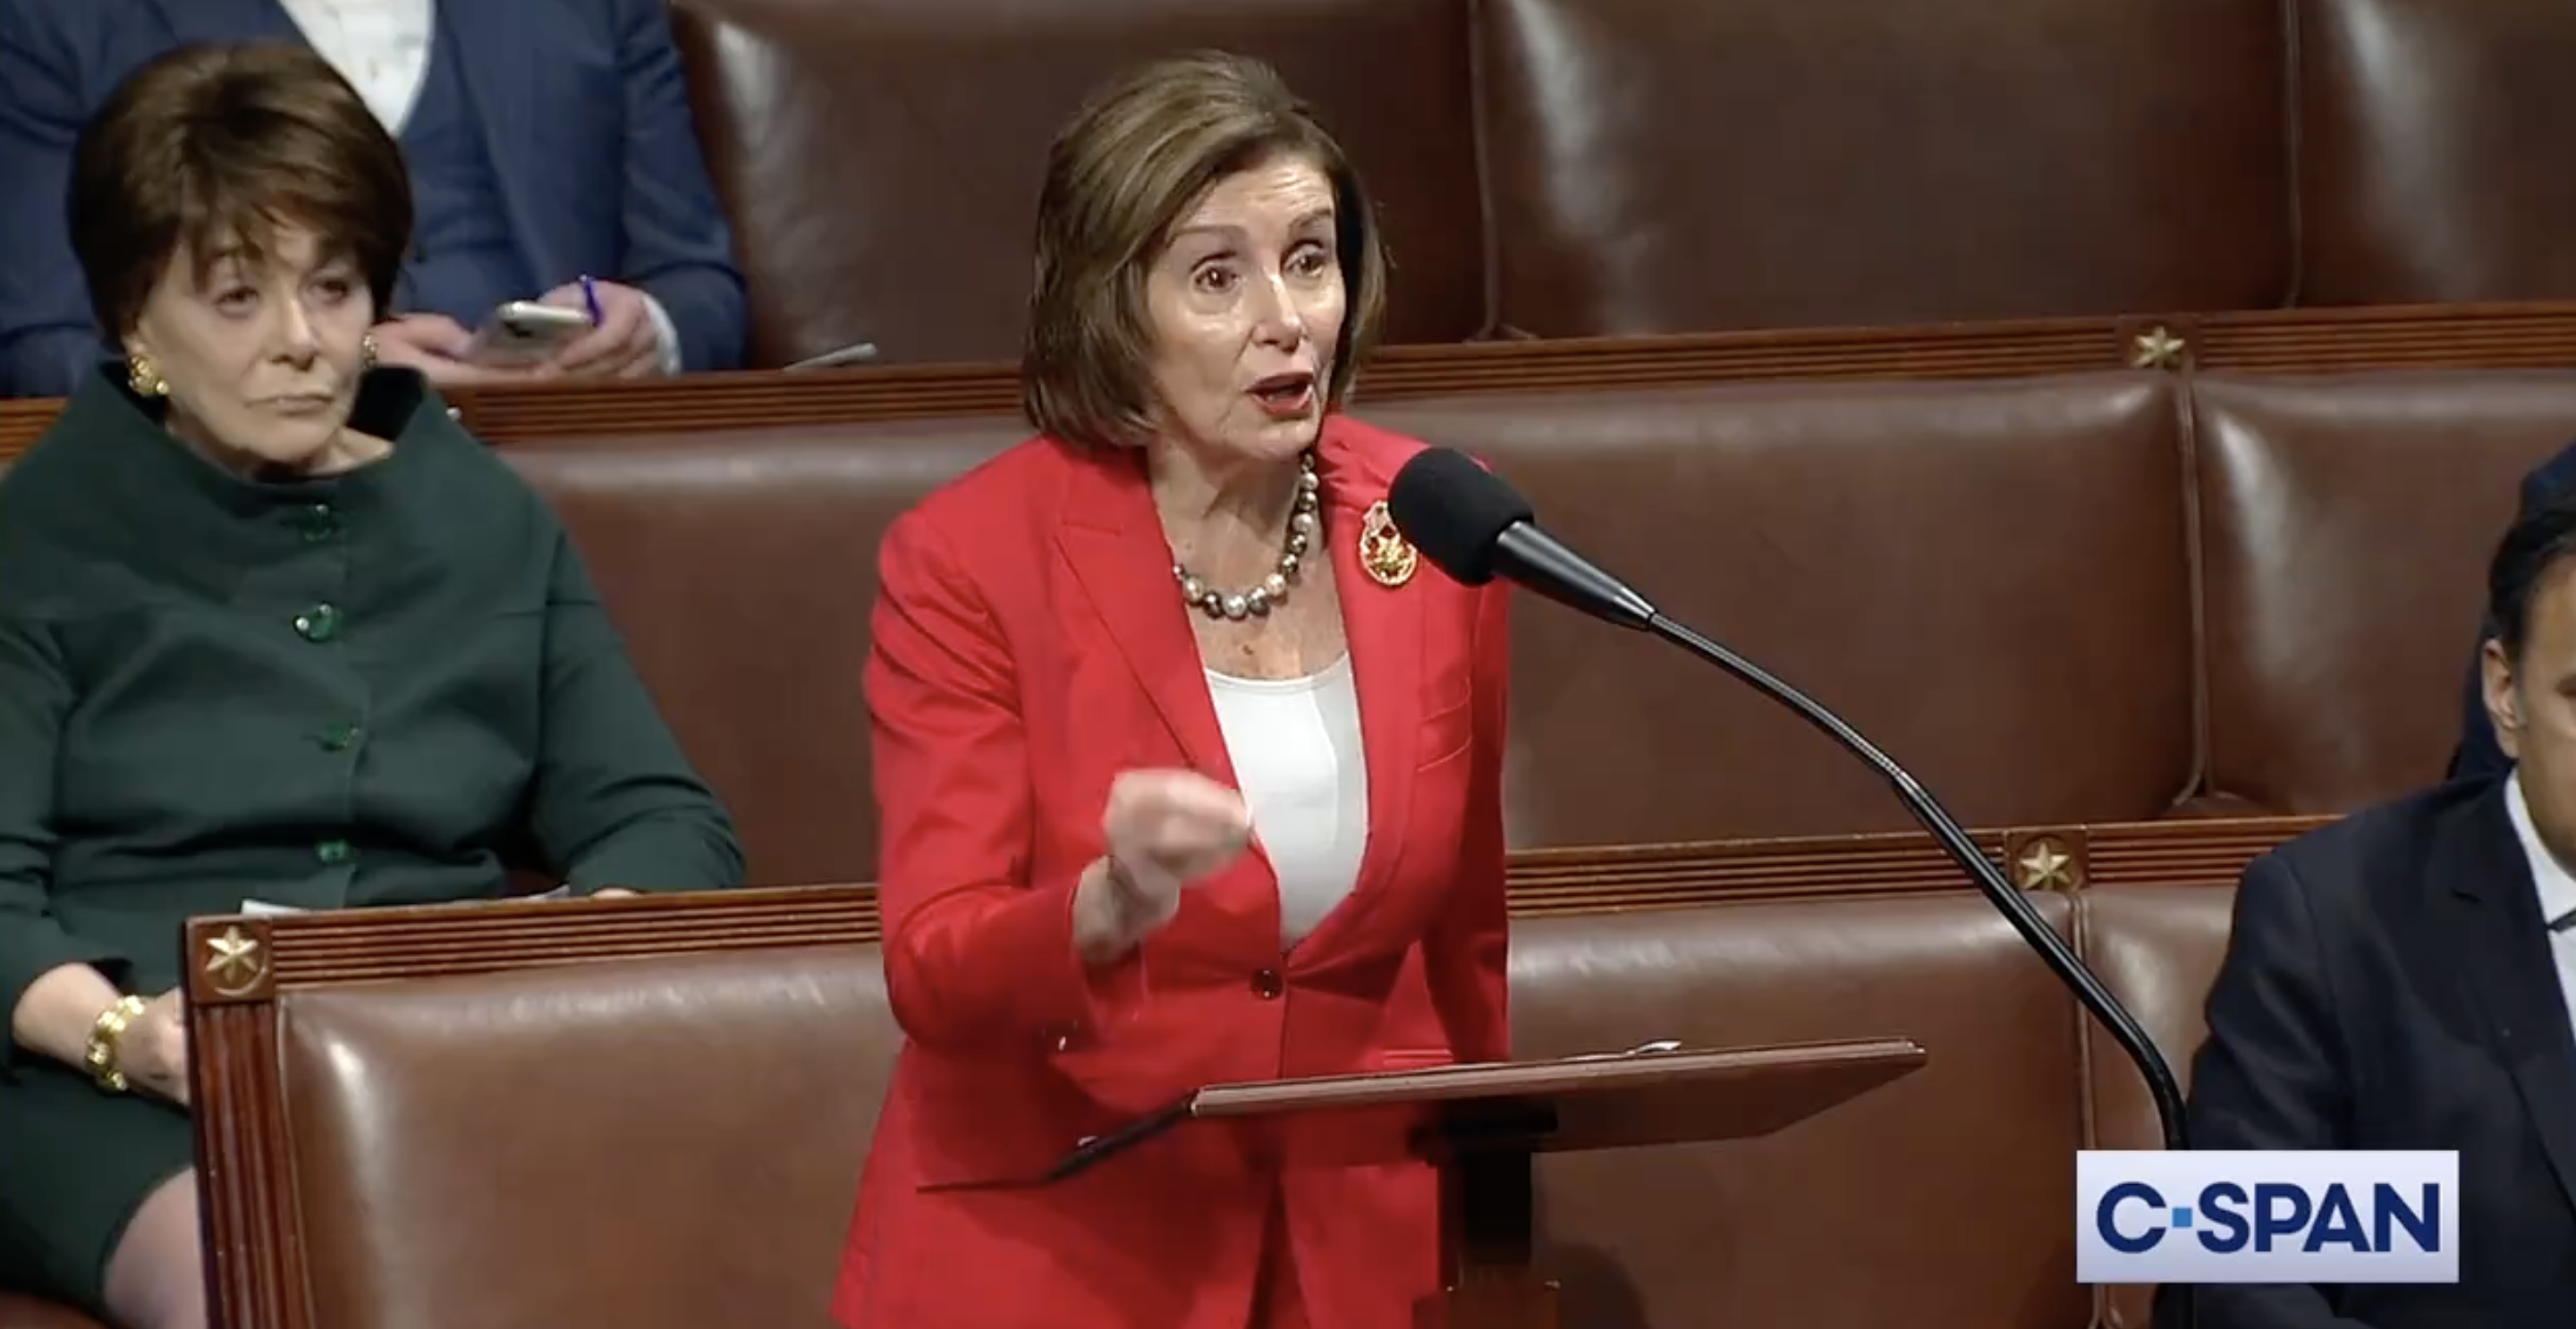 Nancy Pelosi in red speaking at a podium in the House of Representatives chamber